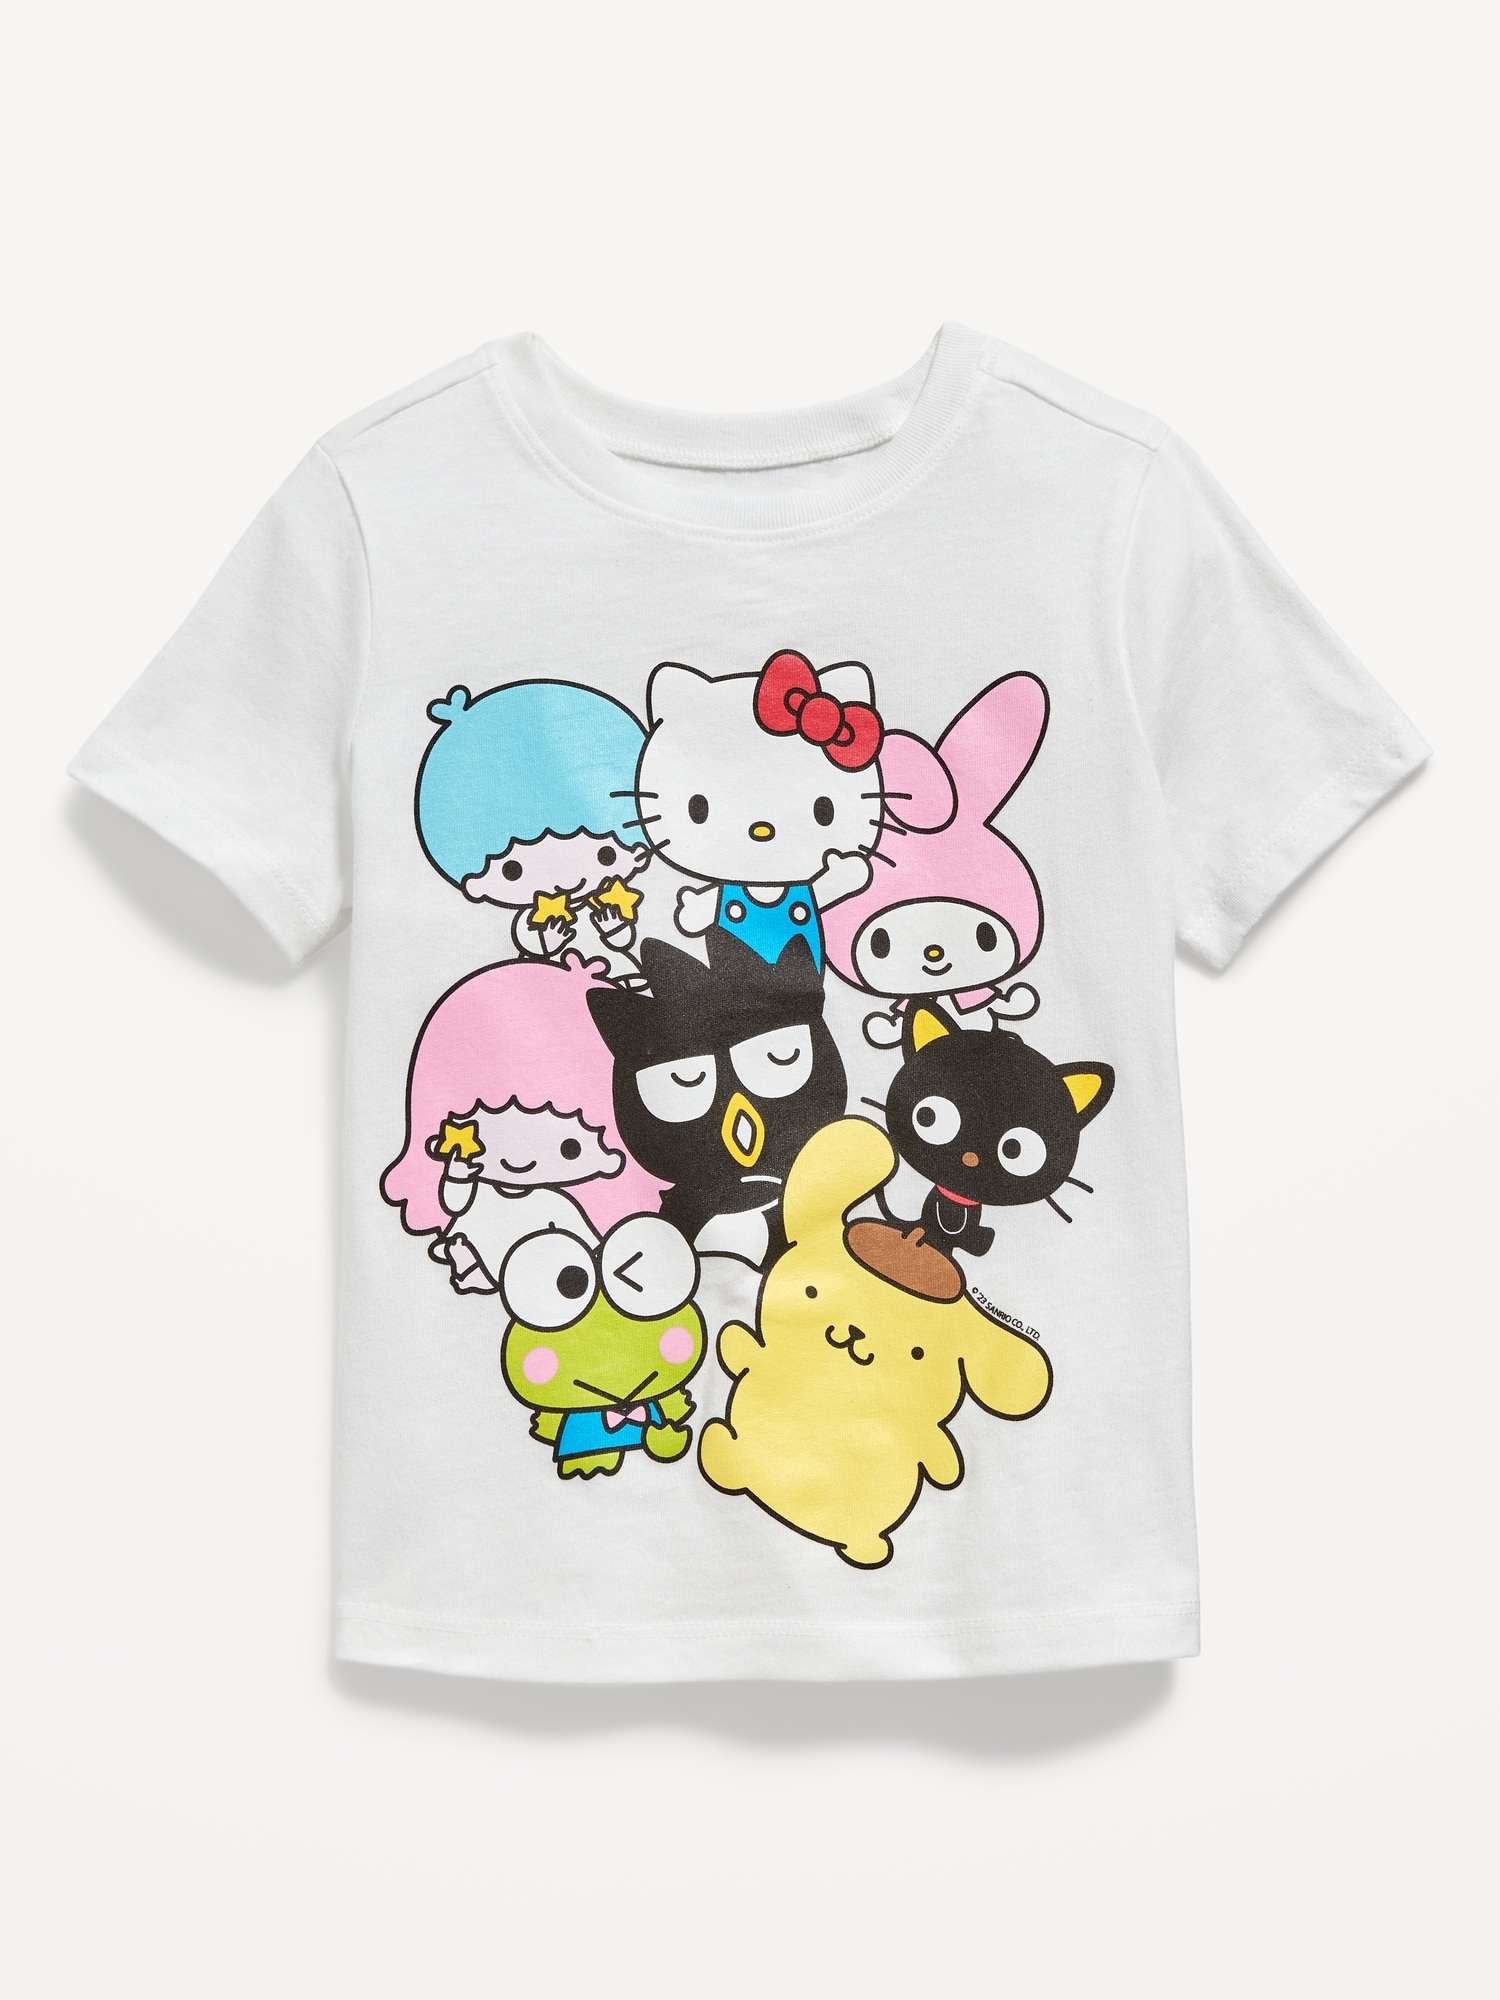 Matching Hello Kitty® Unisex T-Shirt for Toddler | Old Navy